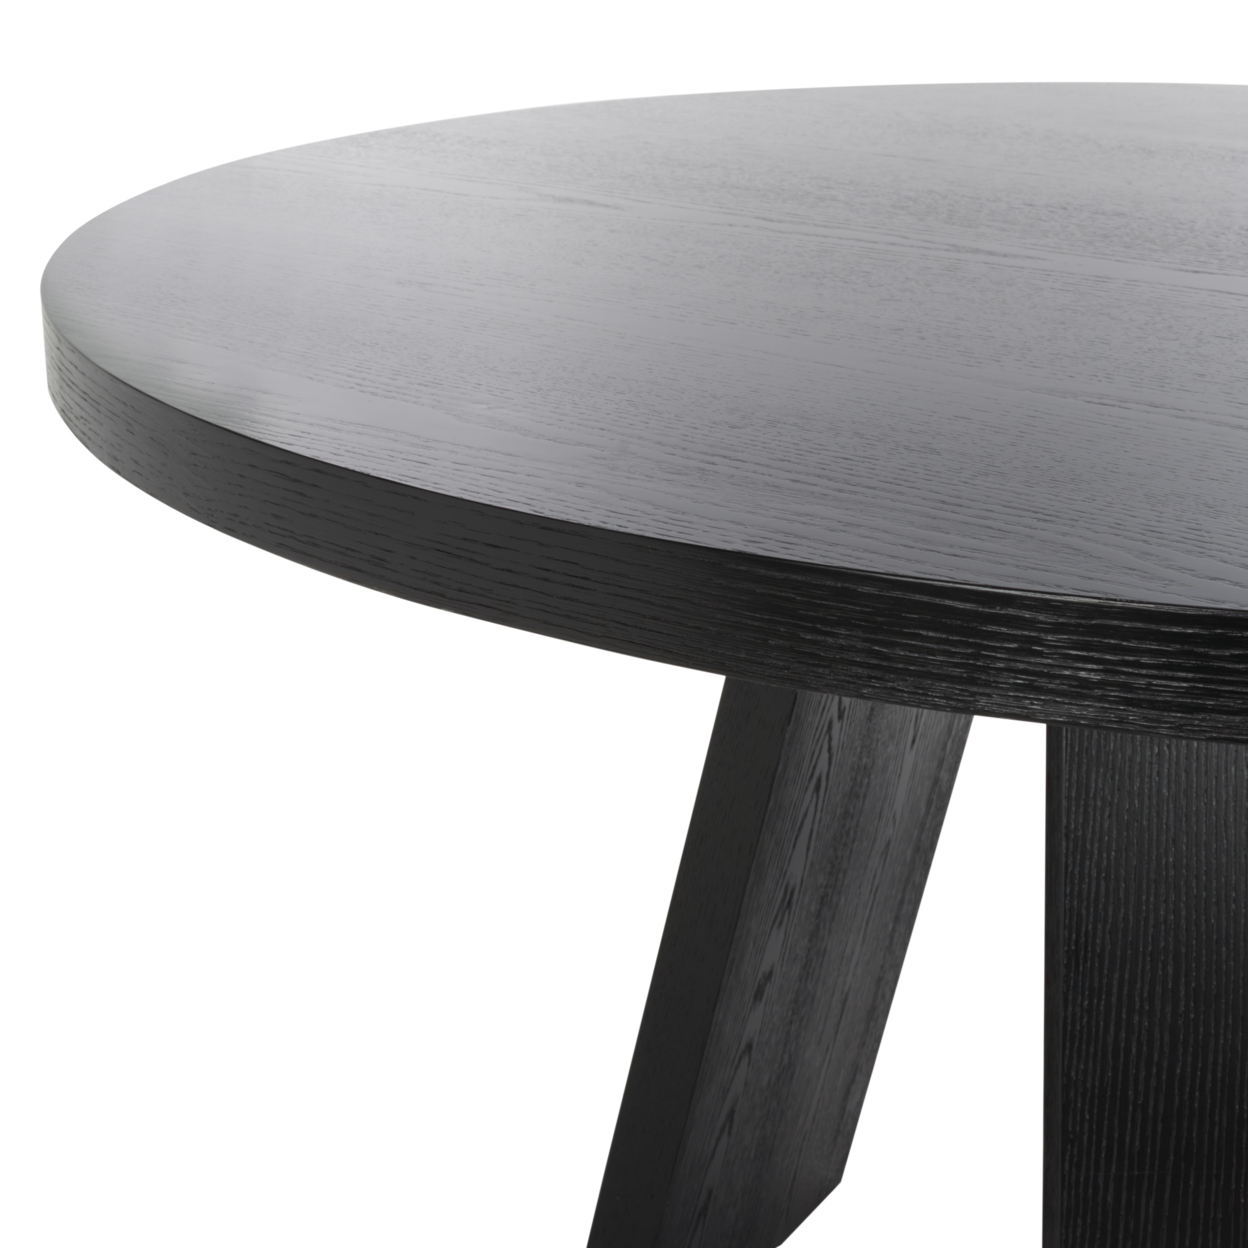 SAFAVIEH COUTURE Julianna 54 Wood Dining Table Black